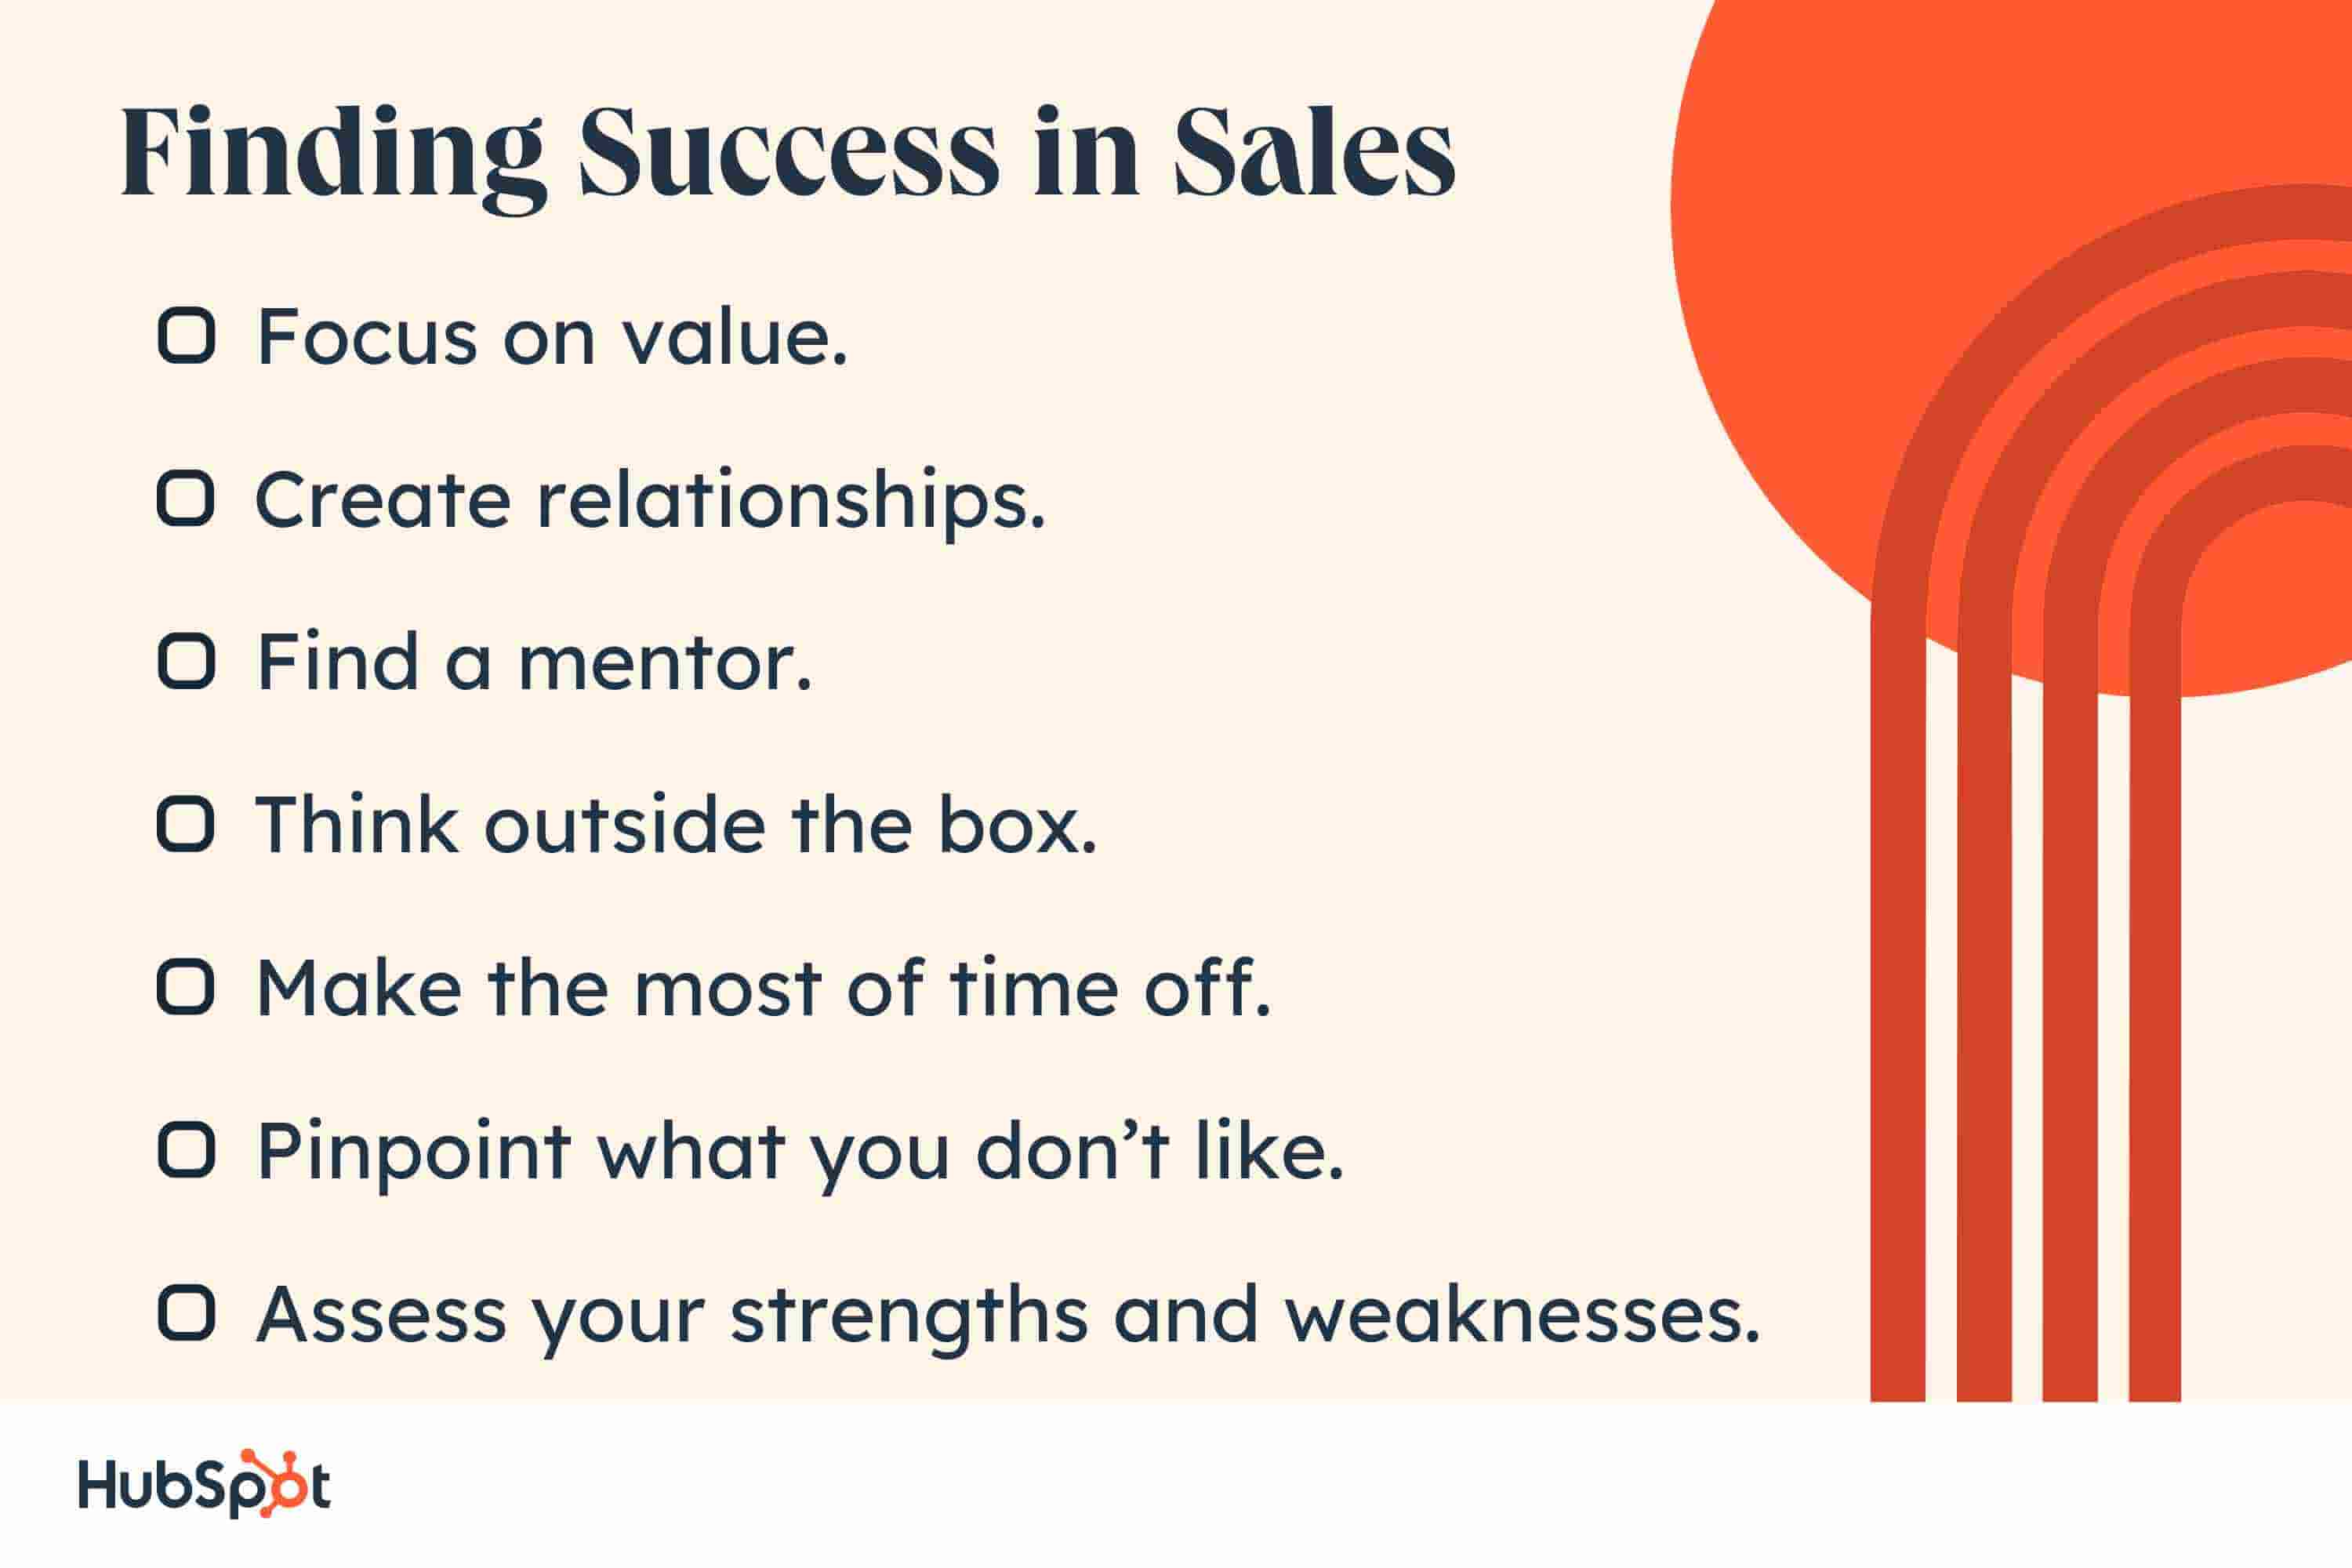  i hate sales, finding success regardless. Focus on value. Create relationships. Find a mentor. Think outside the box. Make the most of time off. Pinpoint what you don’t like. Assess your strengths and weaknesses.